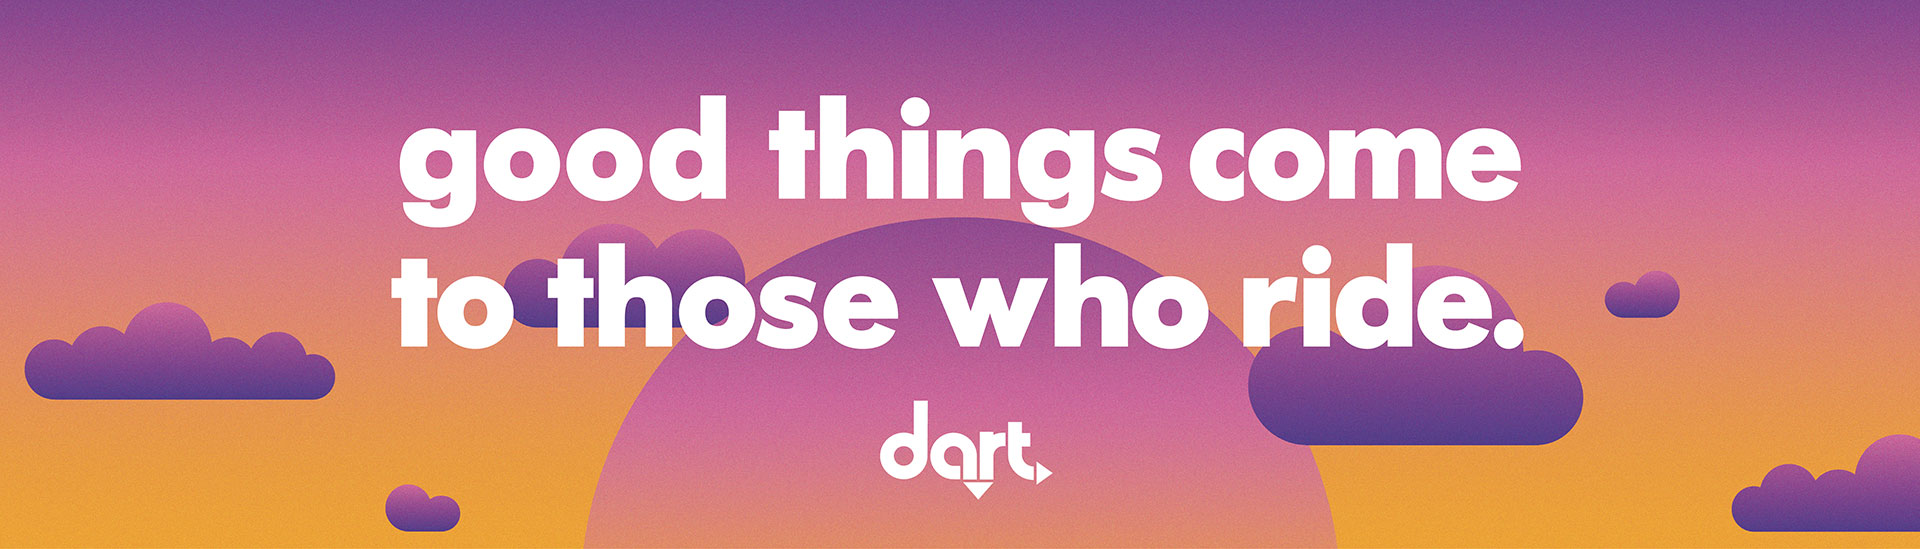 DART – Good things come to those who ride.